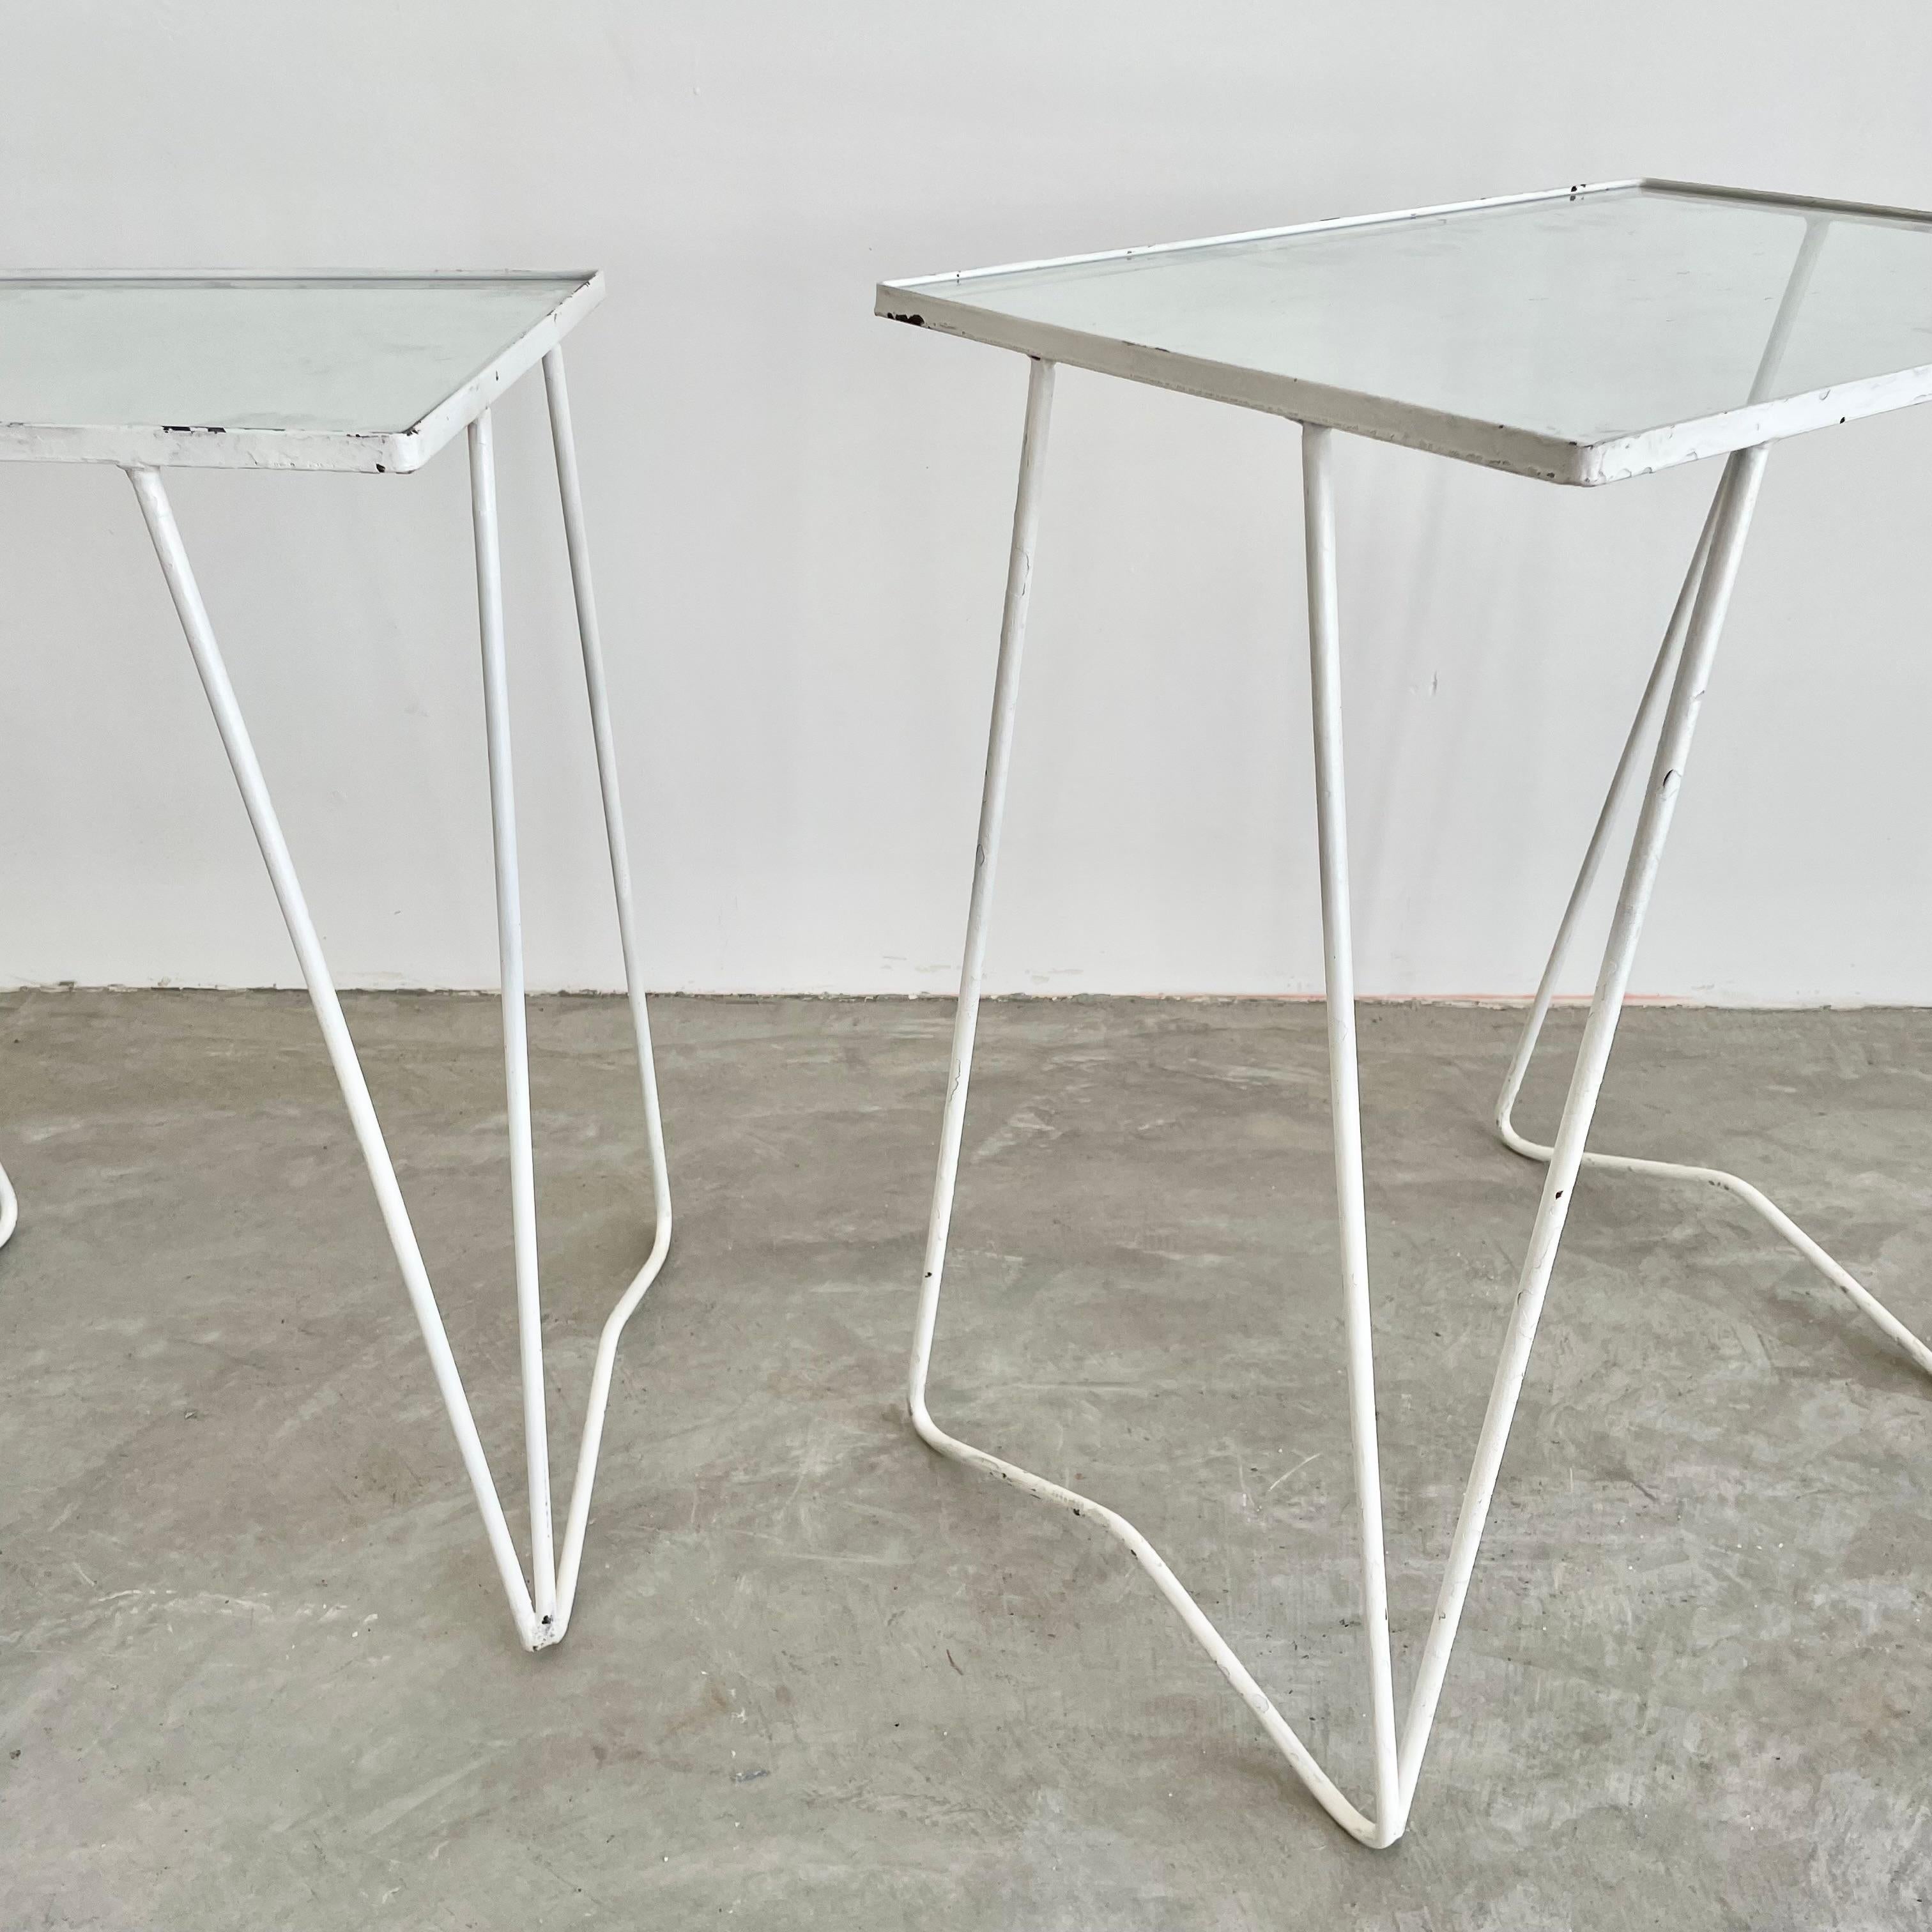 Pair of Iron and Glass Nesting Tables, 1970s USA For Sale 4